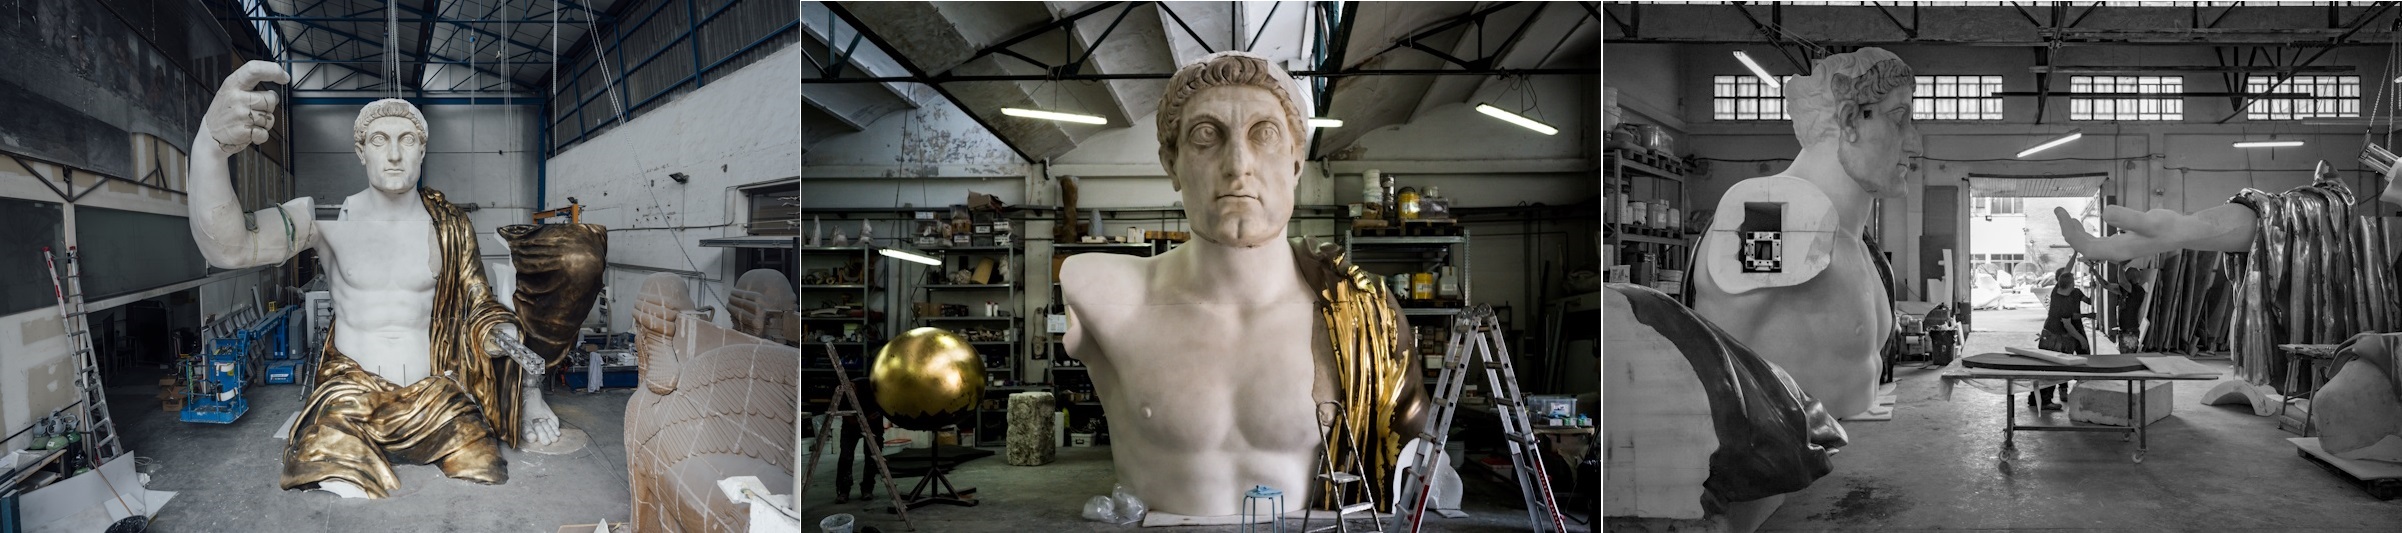 The Colossal Statue of Constantine: FREE Exhibition at the Capitoline Museums 97